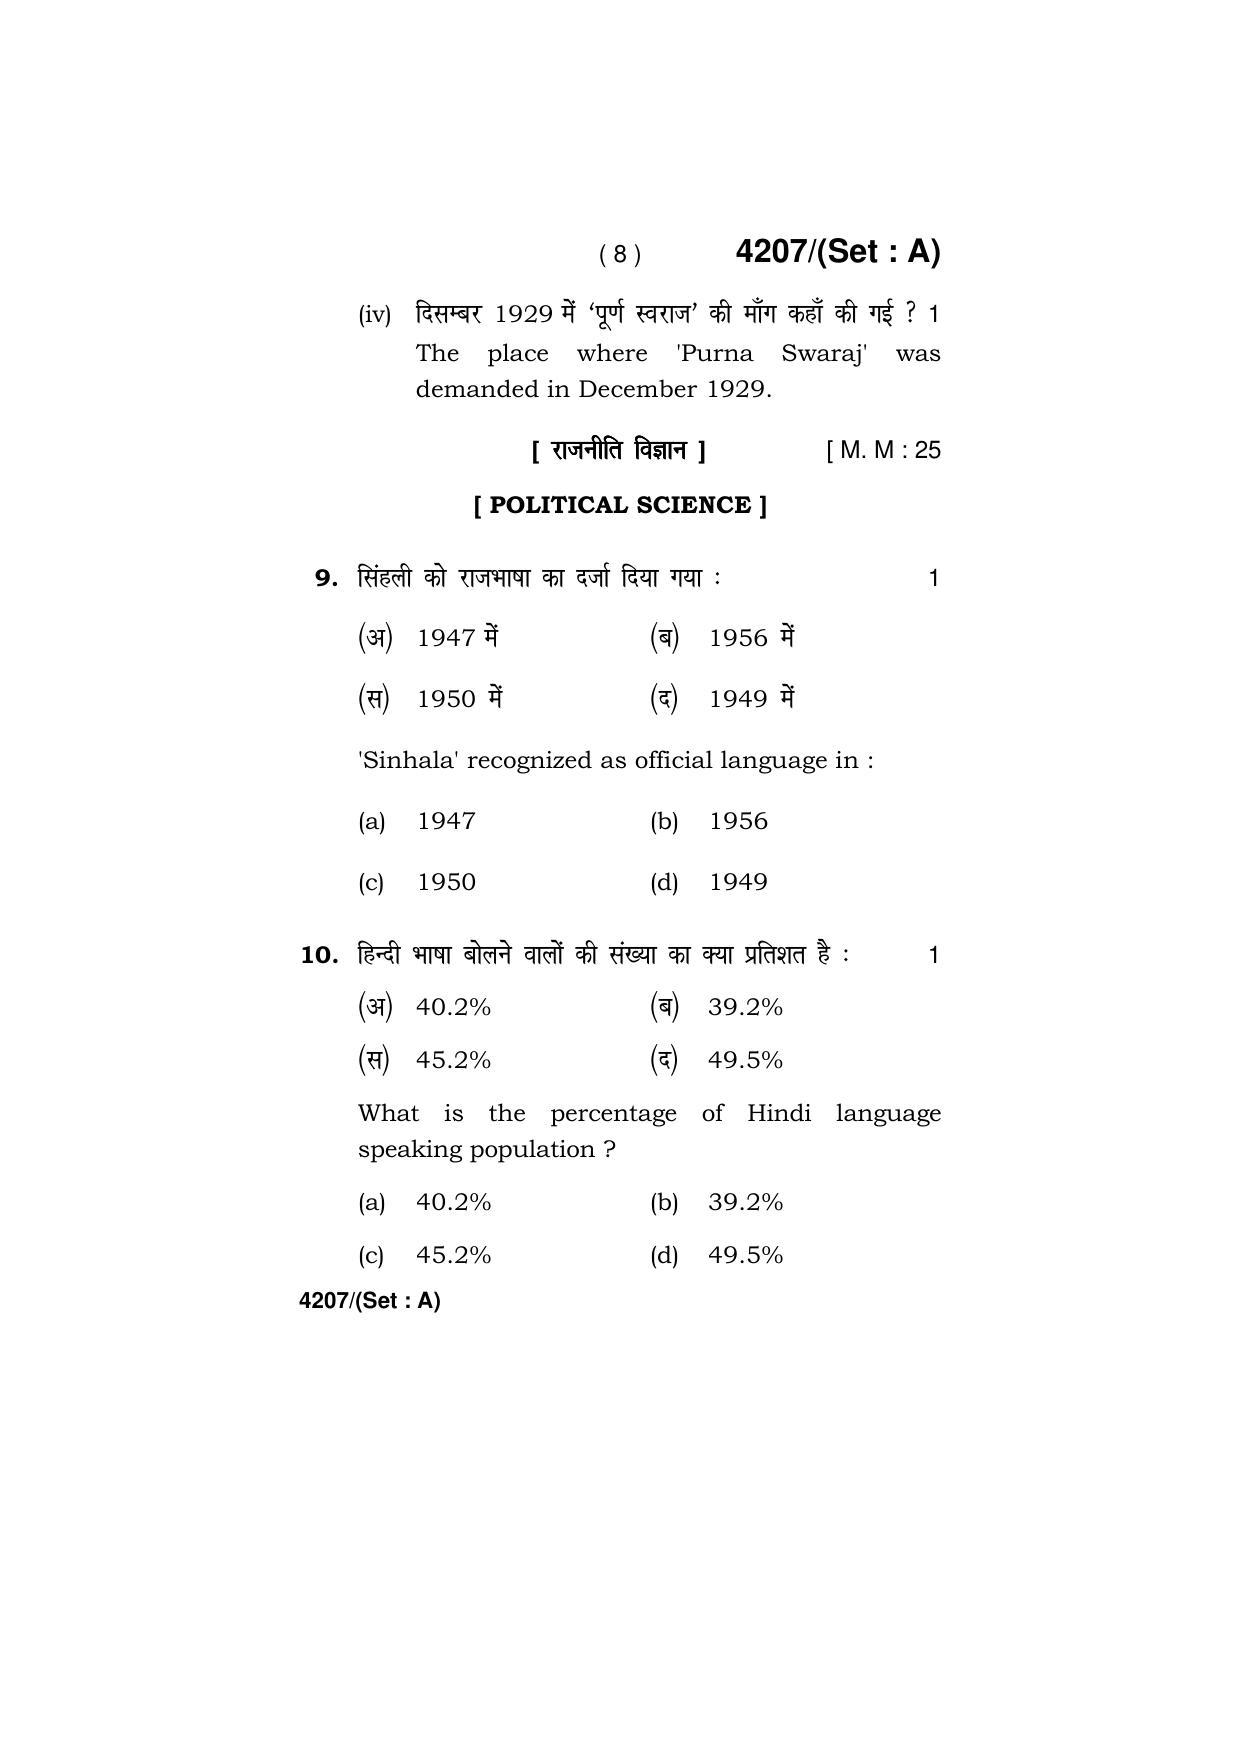 Haryana Board HBSE Class 10 Social Science (All Set) 2019 Question Paper - Page 8